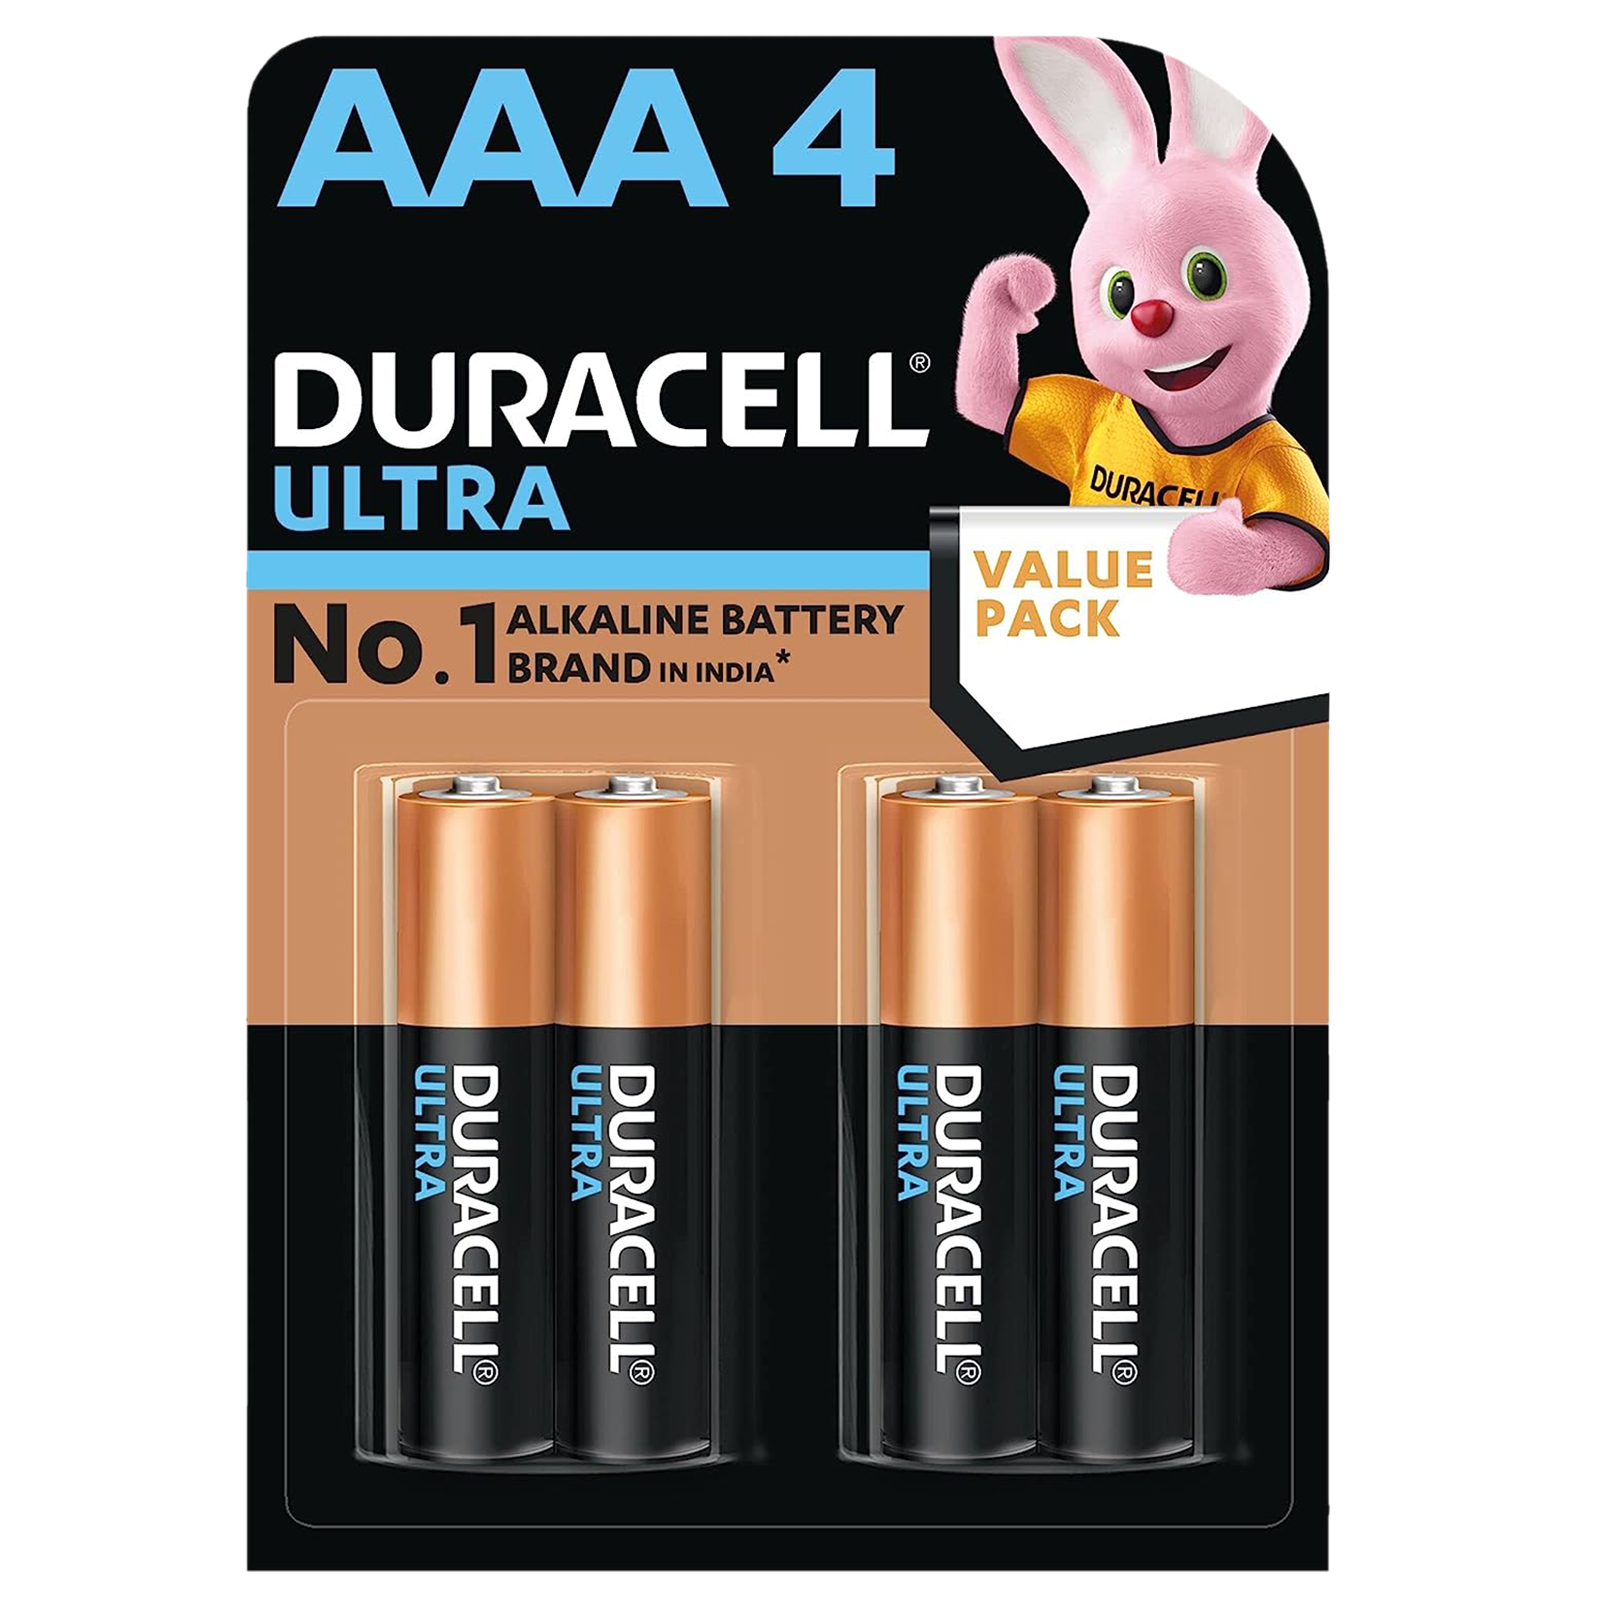 DURACELL Alkaline AAA Battery (Pack of 4)